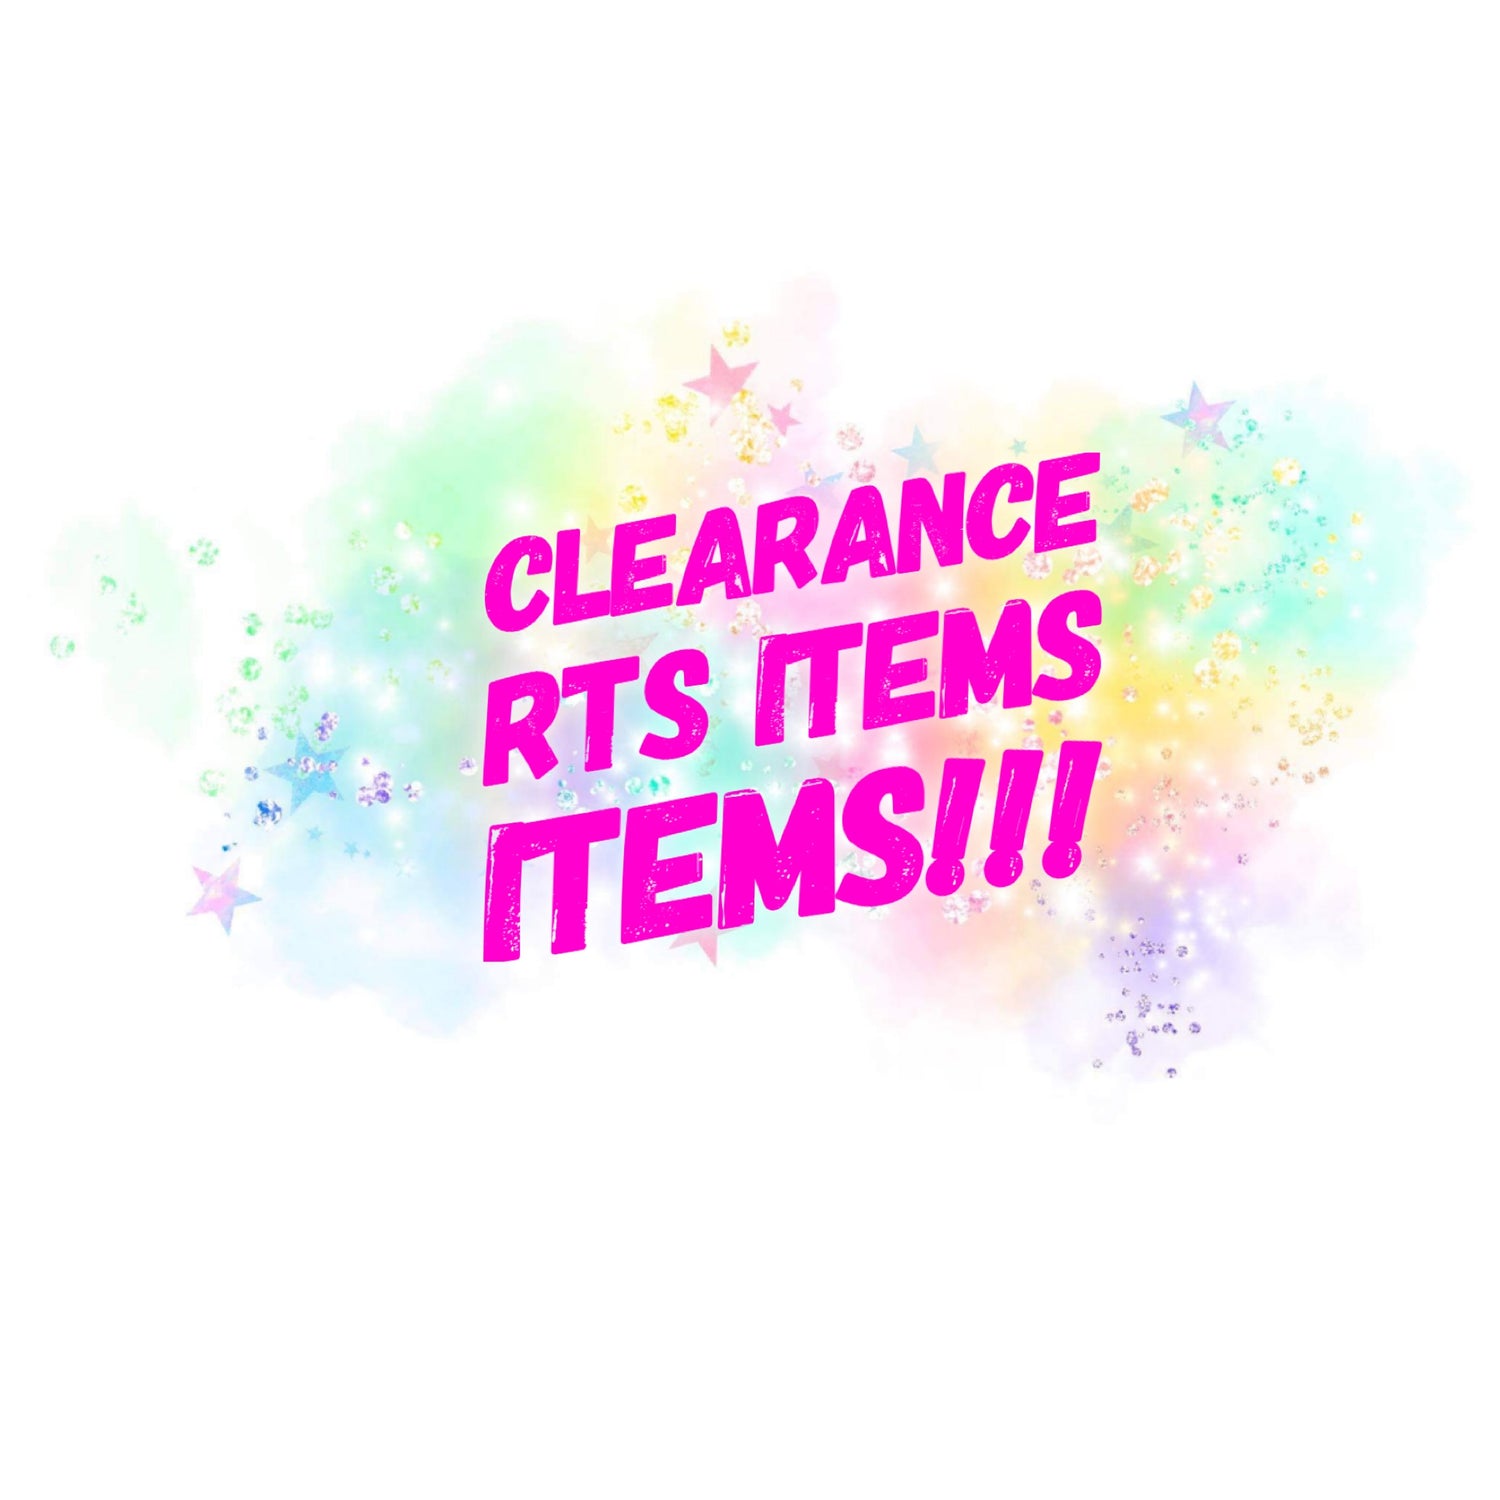 Clearance RTS items!!!